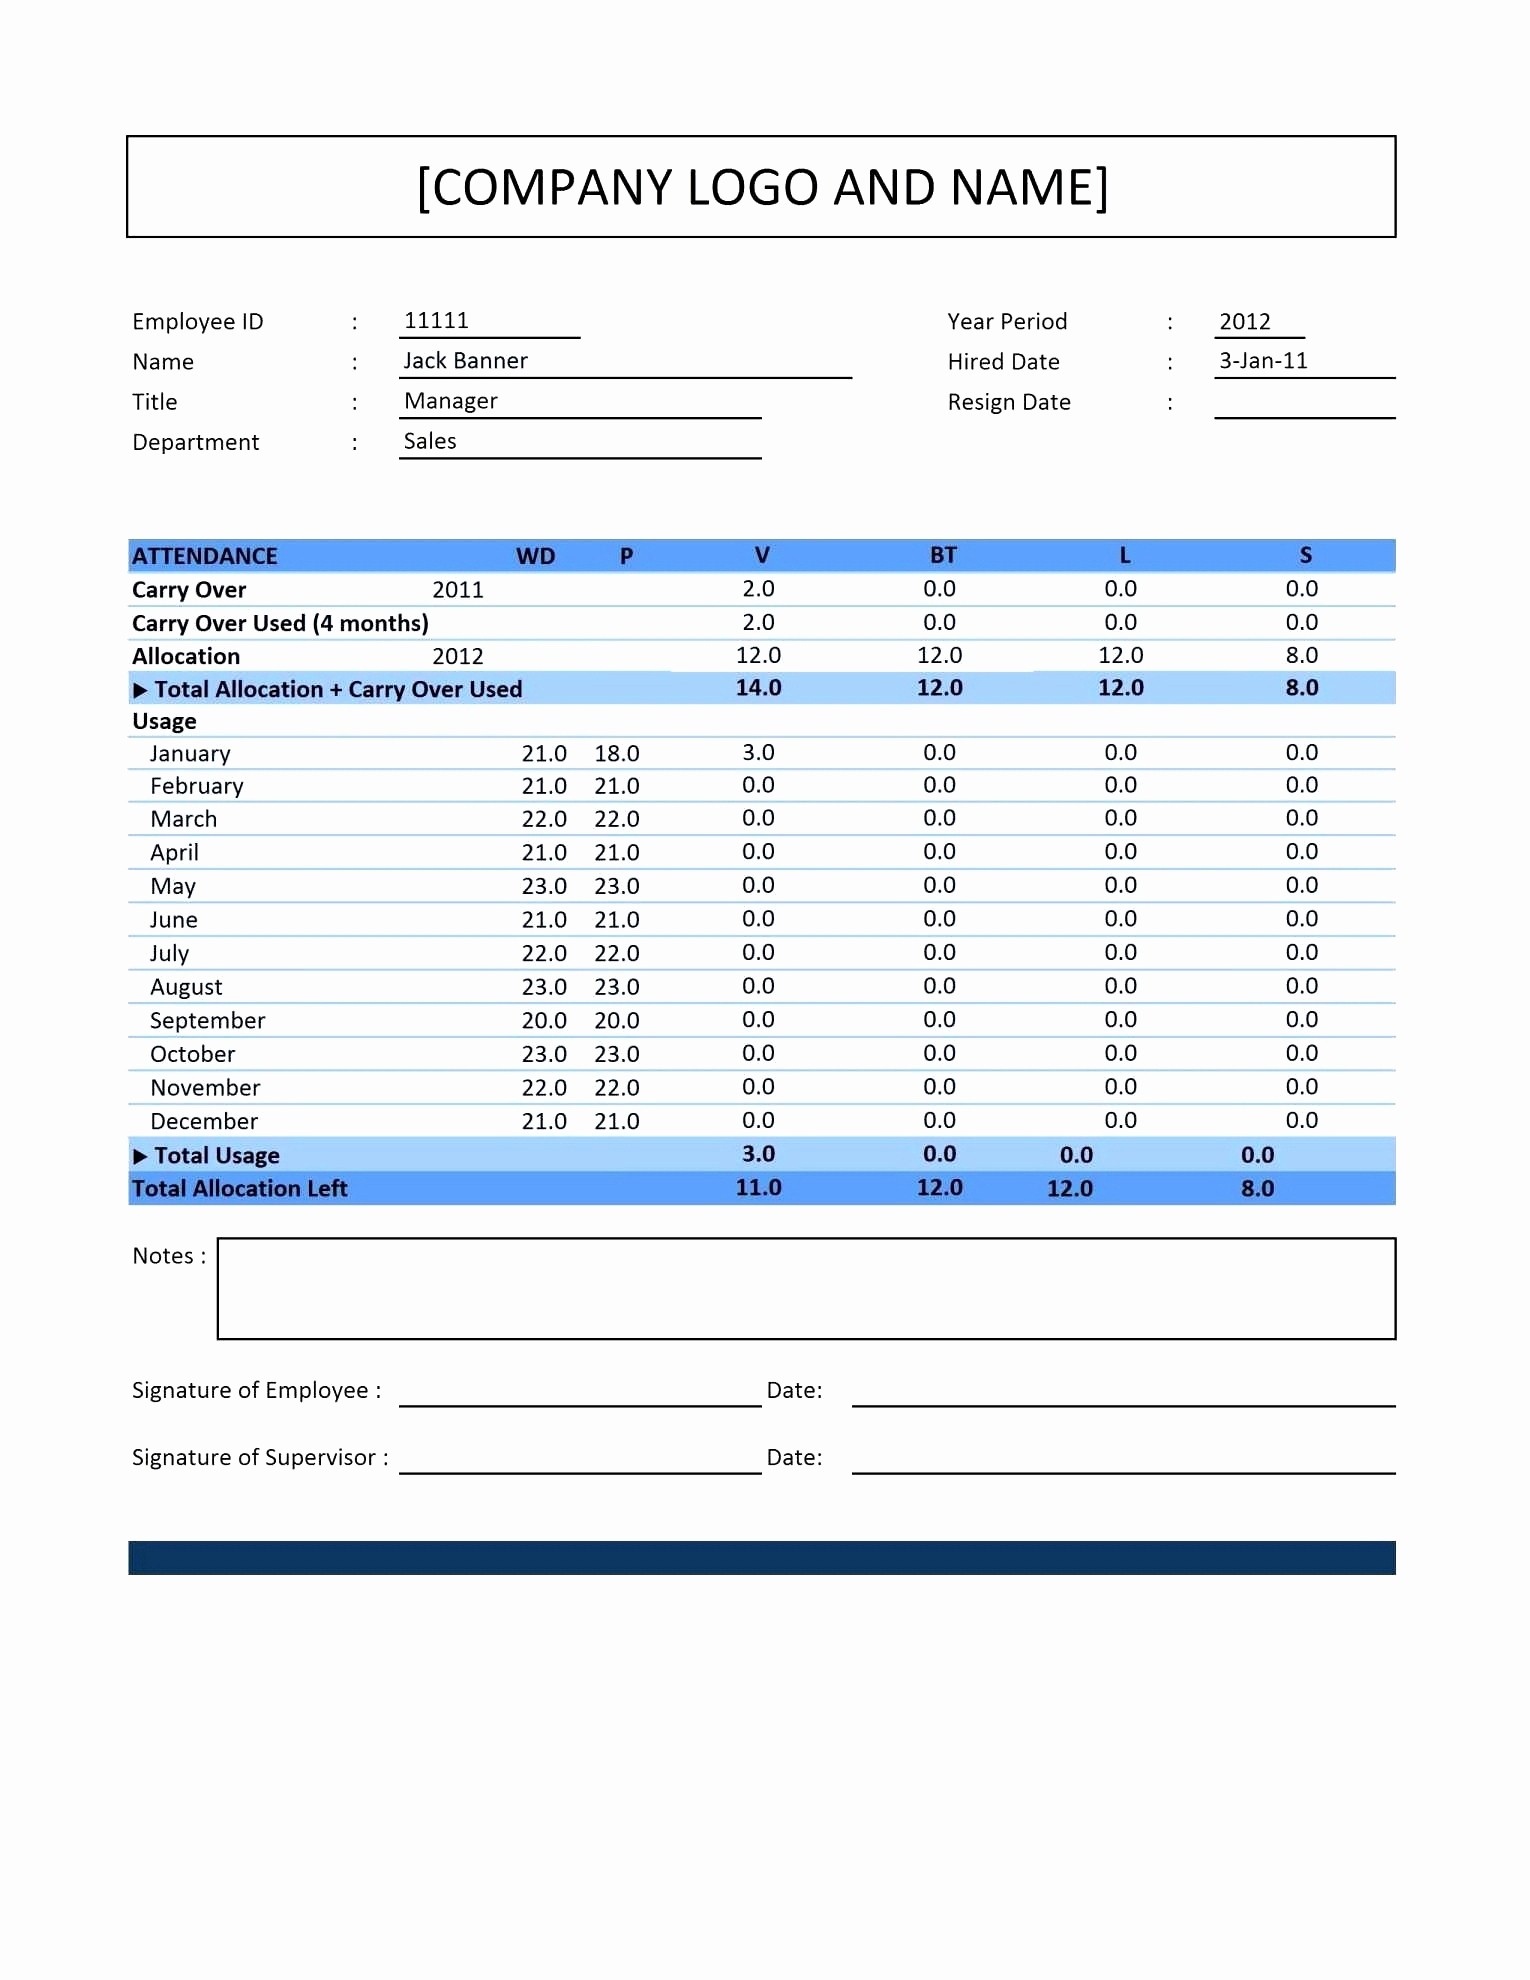 Vacation Accrual Spreadsheet Lovely Employee Document Pto Excel